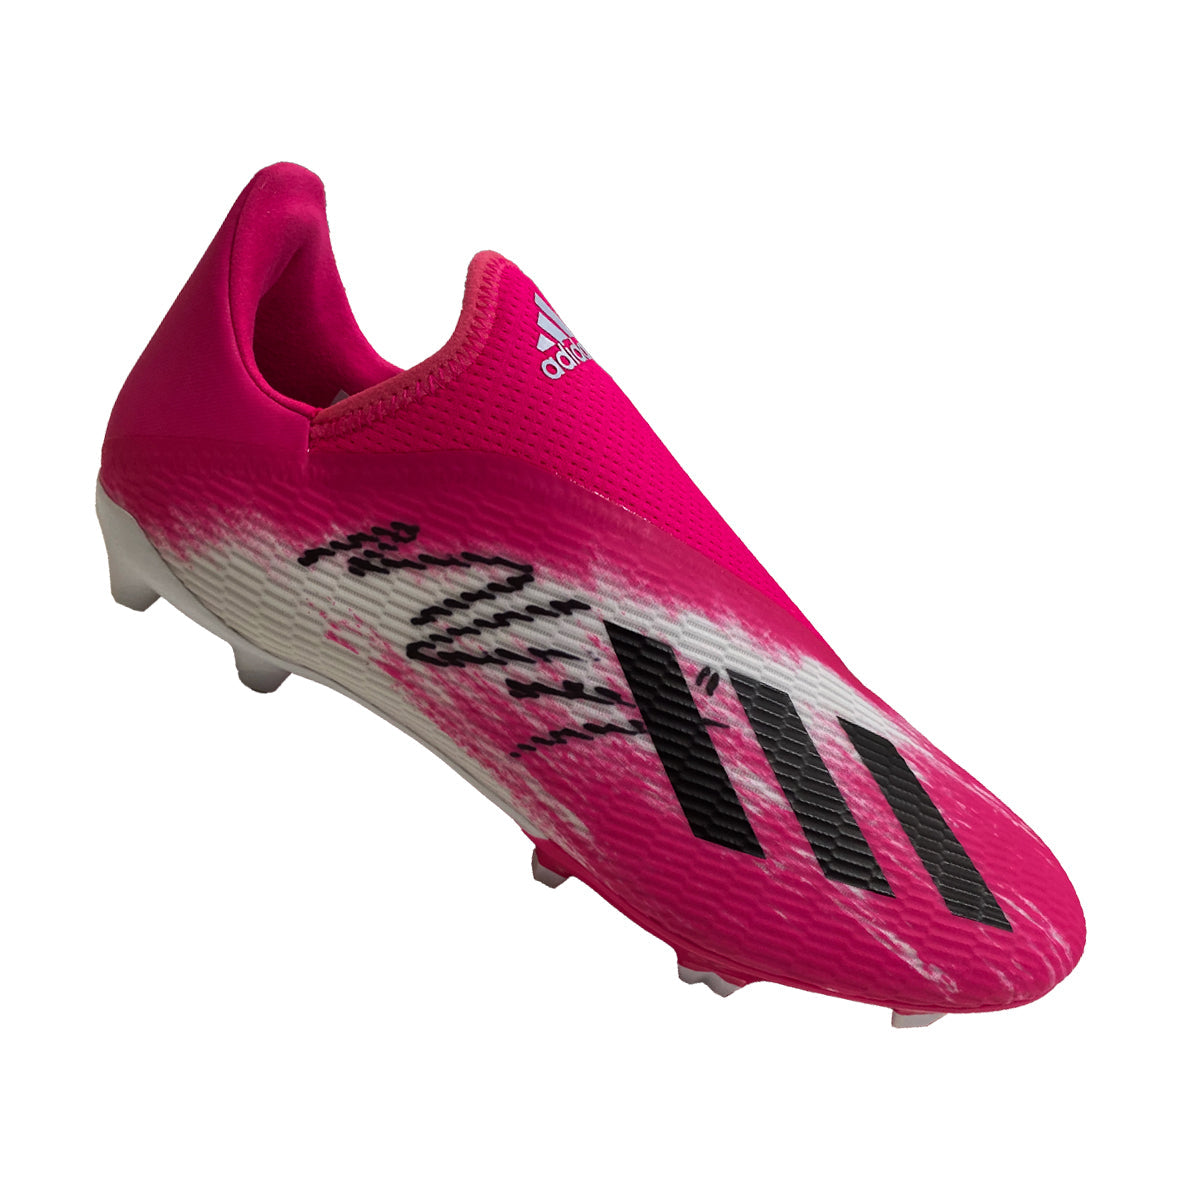 Mohamed Salah Signed White and Pink Adidas Boot - The Bootroom Collection